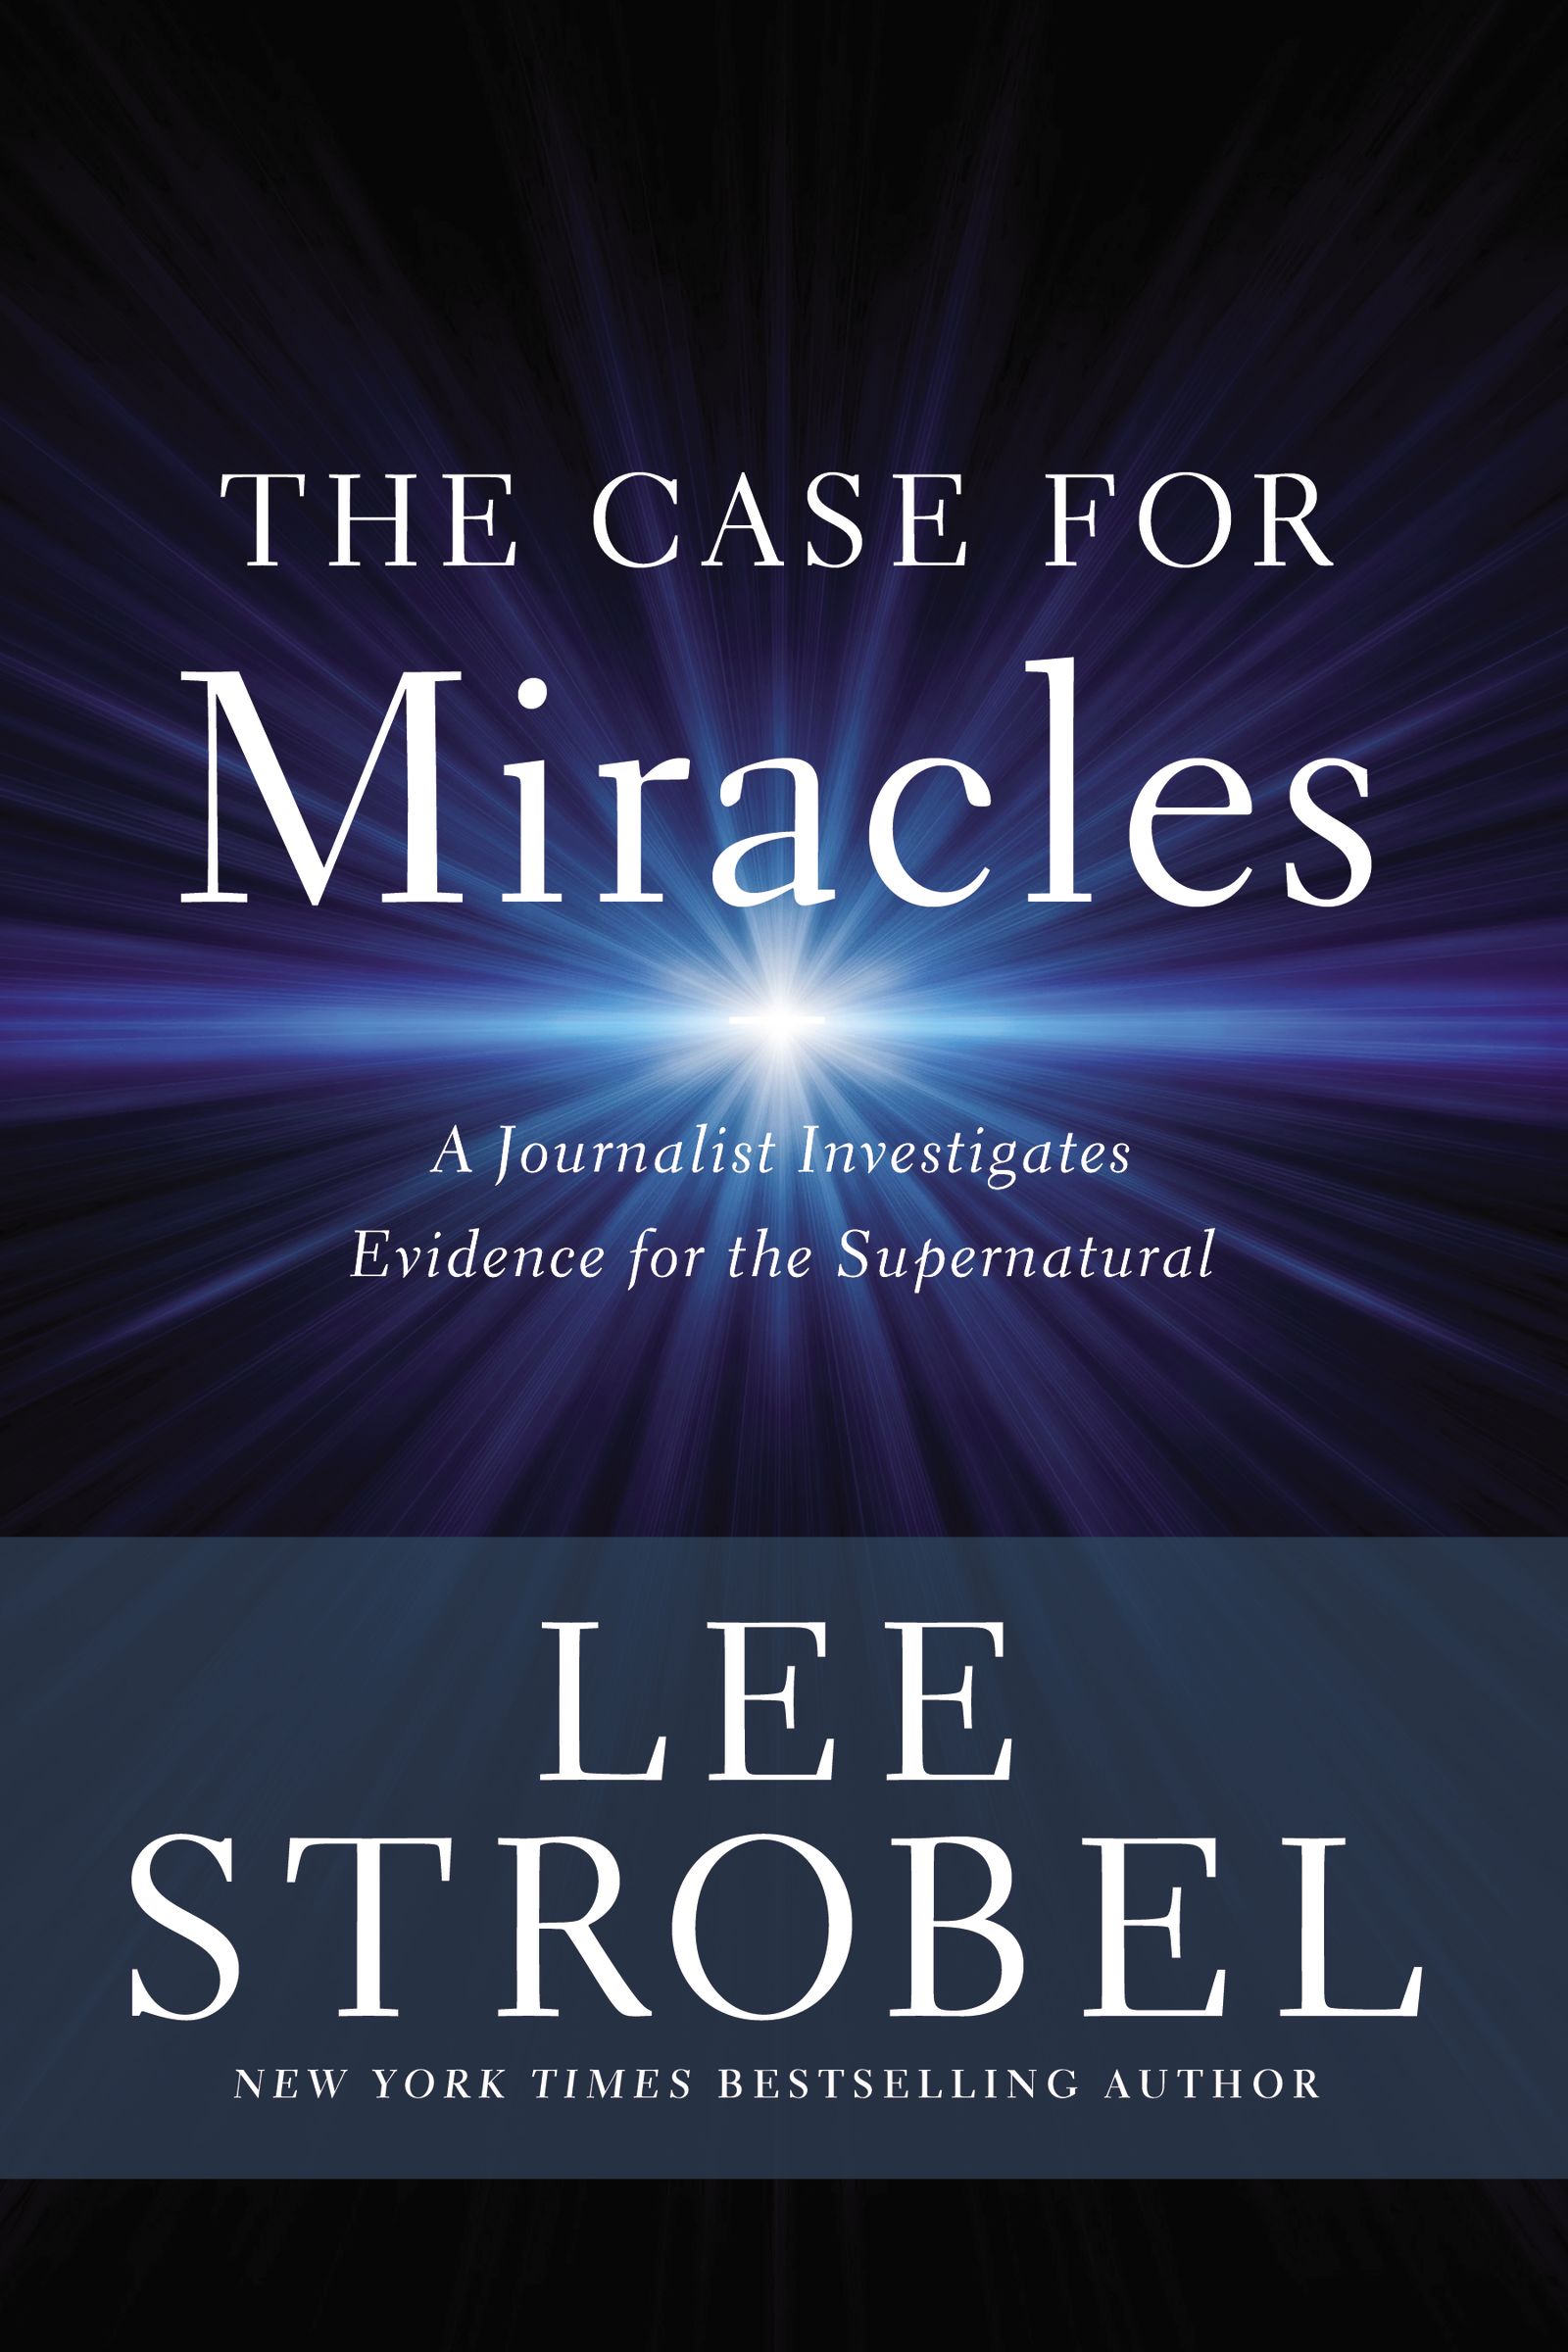 Image of The Case for Miracles other